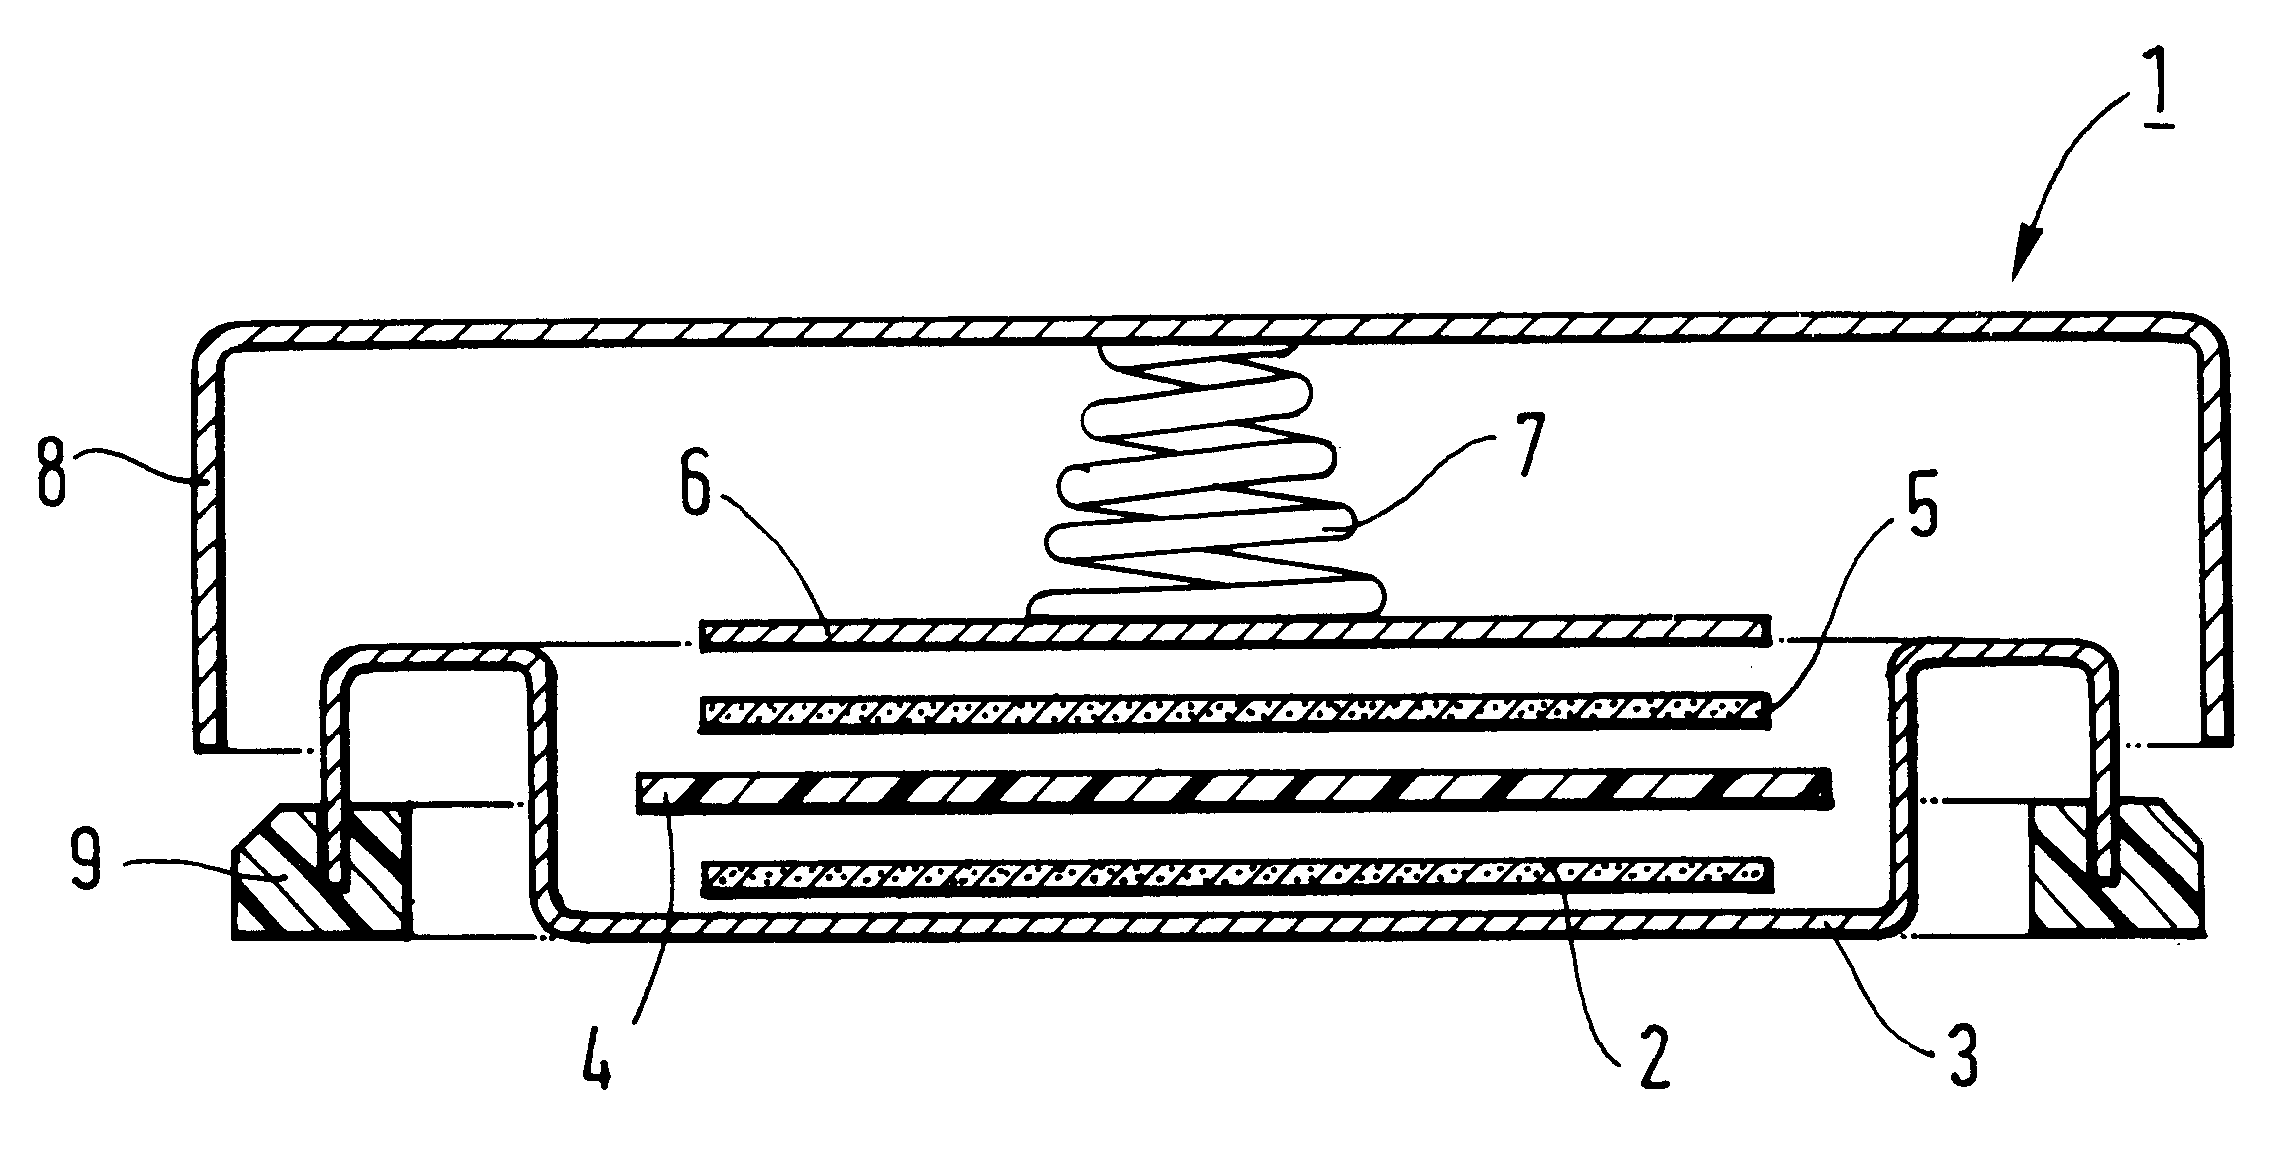 Positive electrode for a lithium rechargeable electro-chemical cell having an aluminum current collector